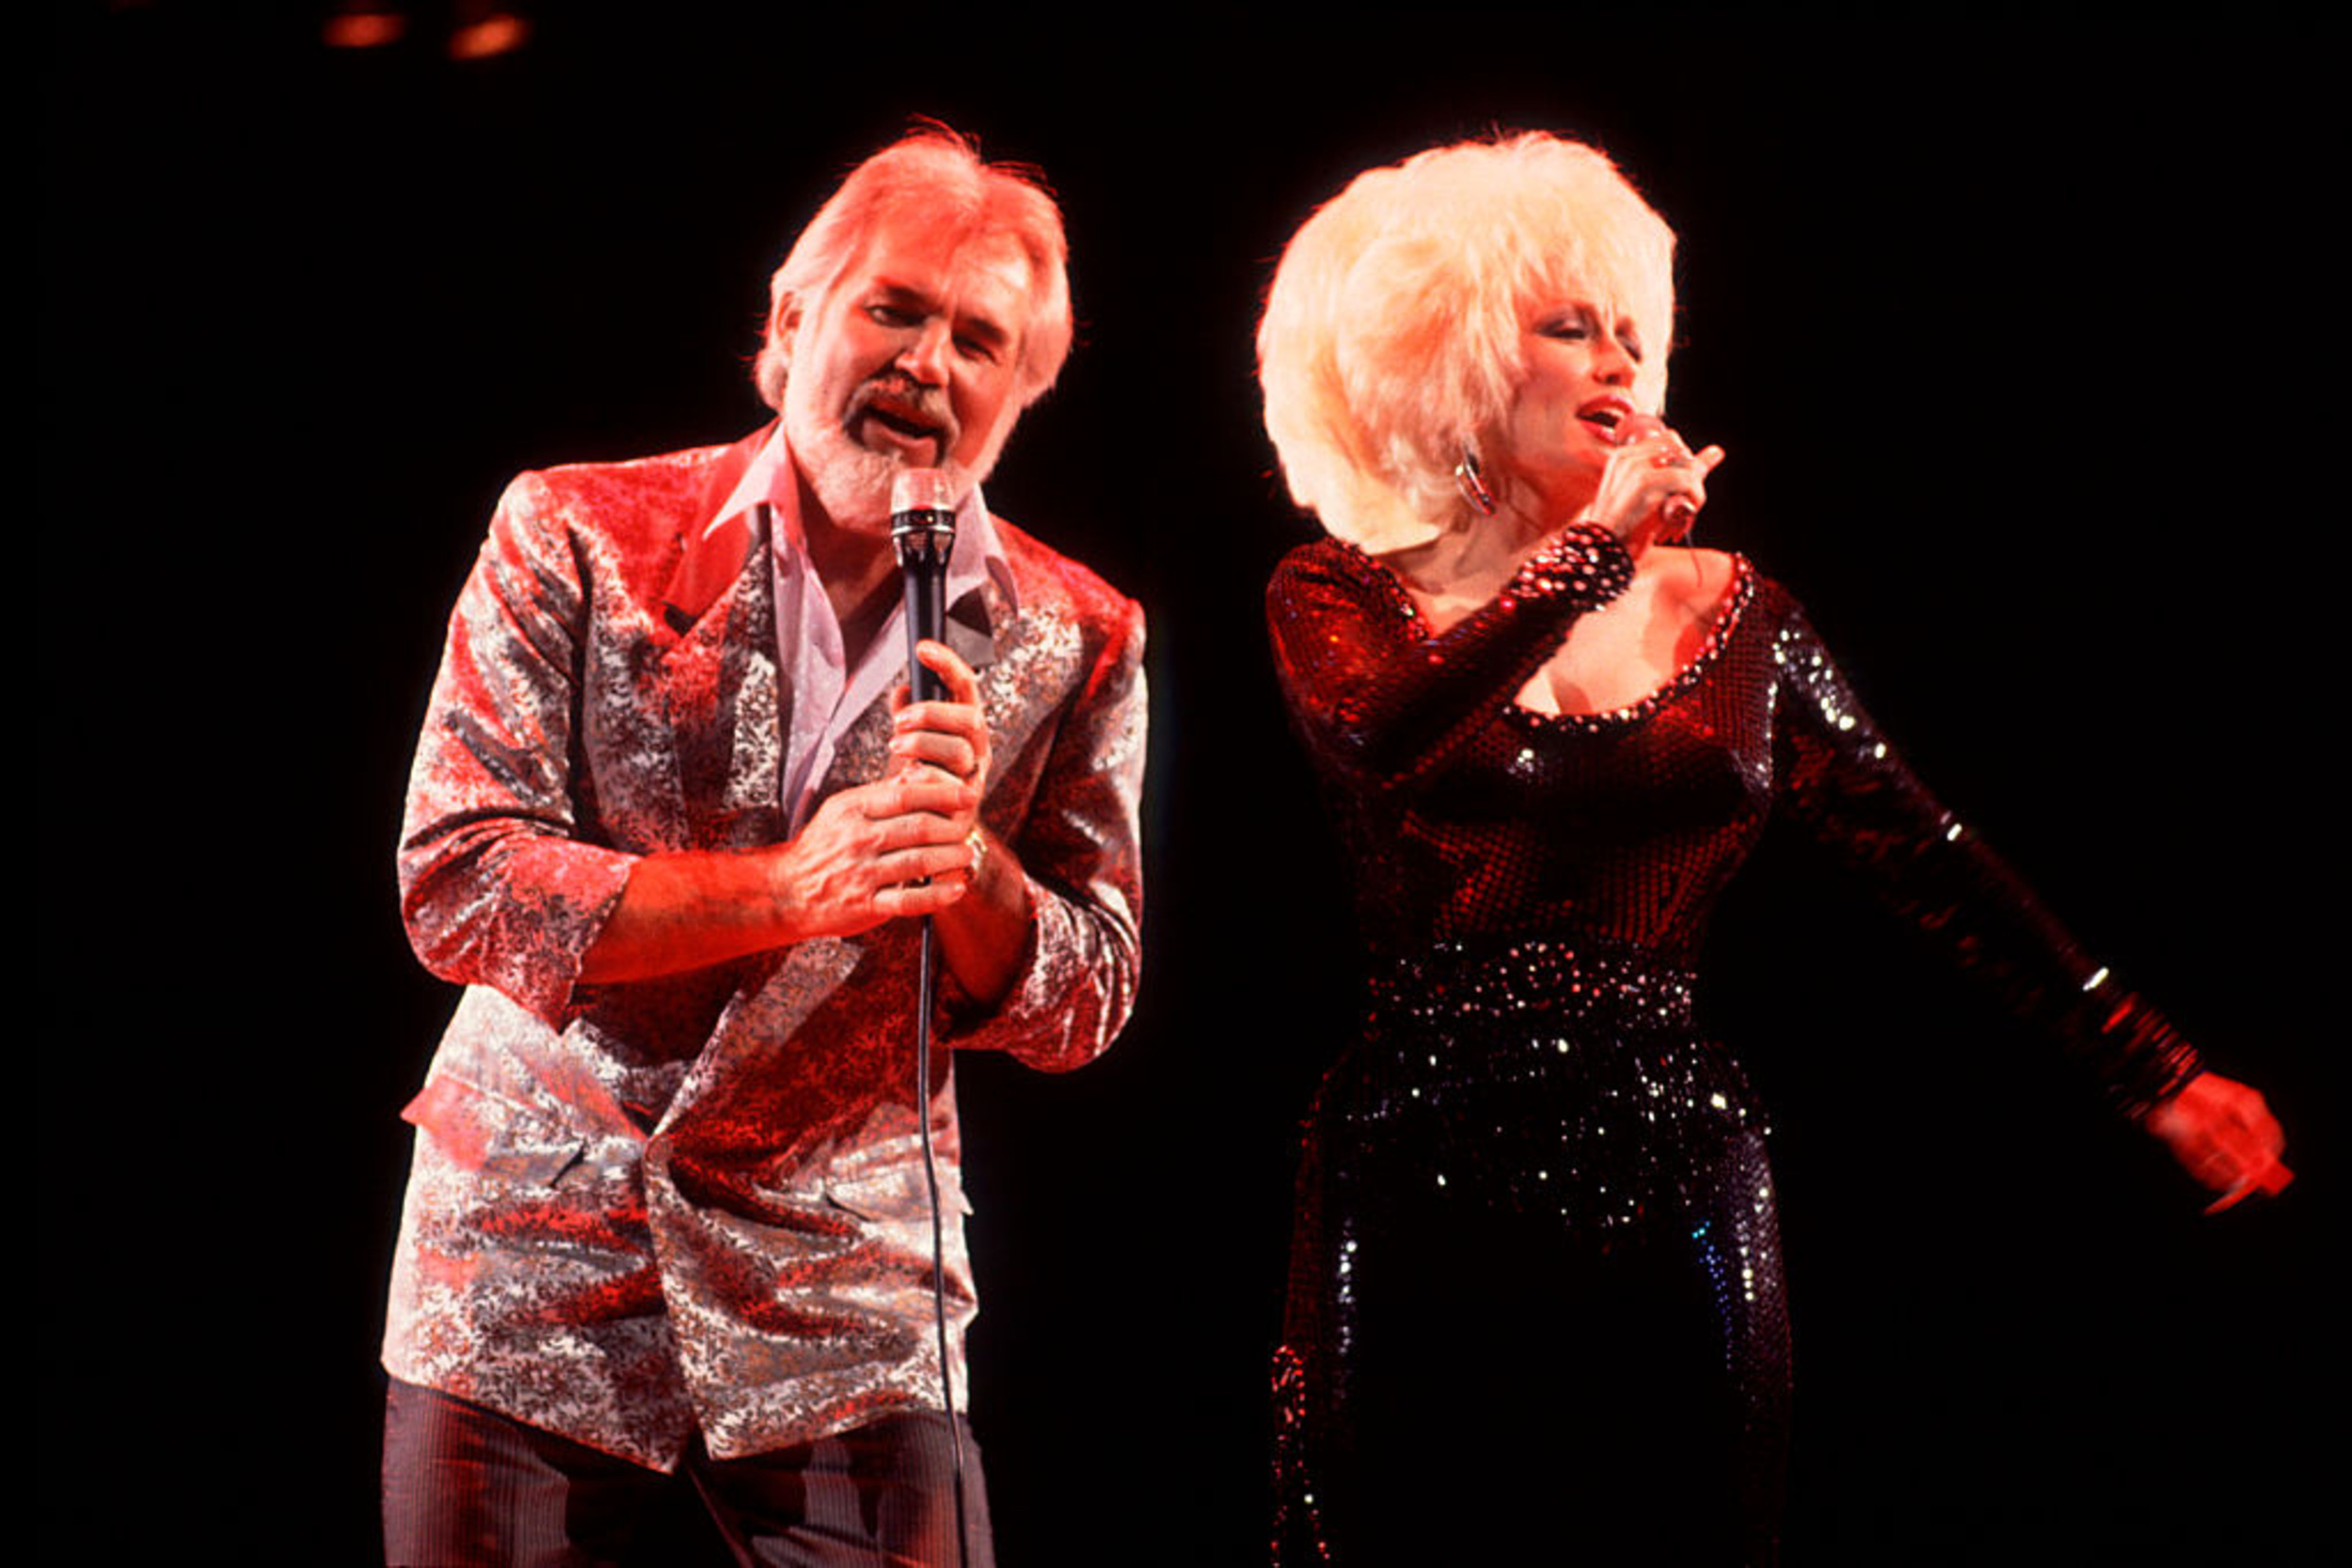 <p>Disco titans the Bee Gees wrote one of the most famous country duets in history, Kenny Rogers' and Dolly Parton's "Islands in the Stream," which was originally intended for Diana Ross. </p><p>You may also like: <a href='https://www.yardbarker.com/entertainment/articles/20_facts_you_might_not_know_about_lord_of_the_rings_return_of_the_king/s1__38646244'>20 facts you might not know about 'Lord of the Rings: Return of the King'</a></p>